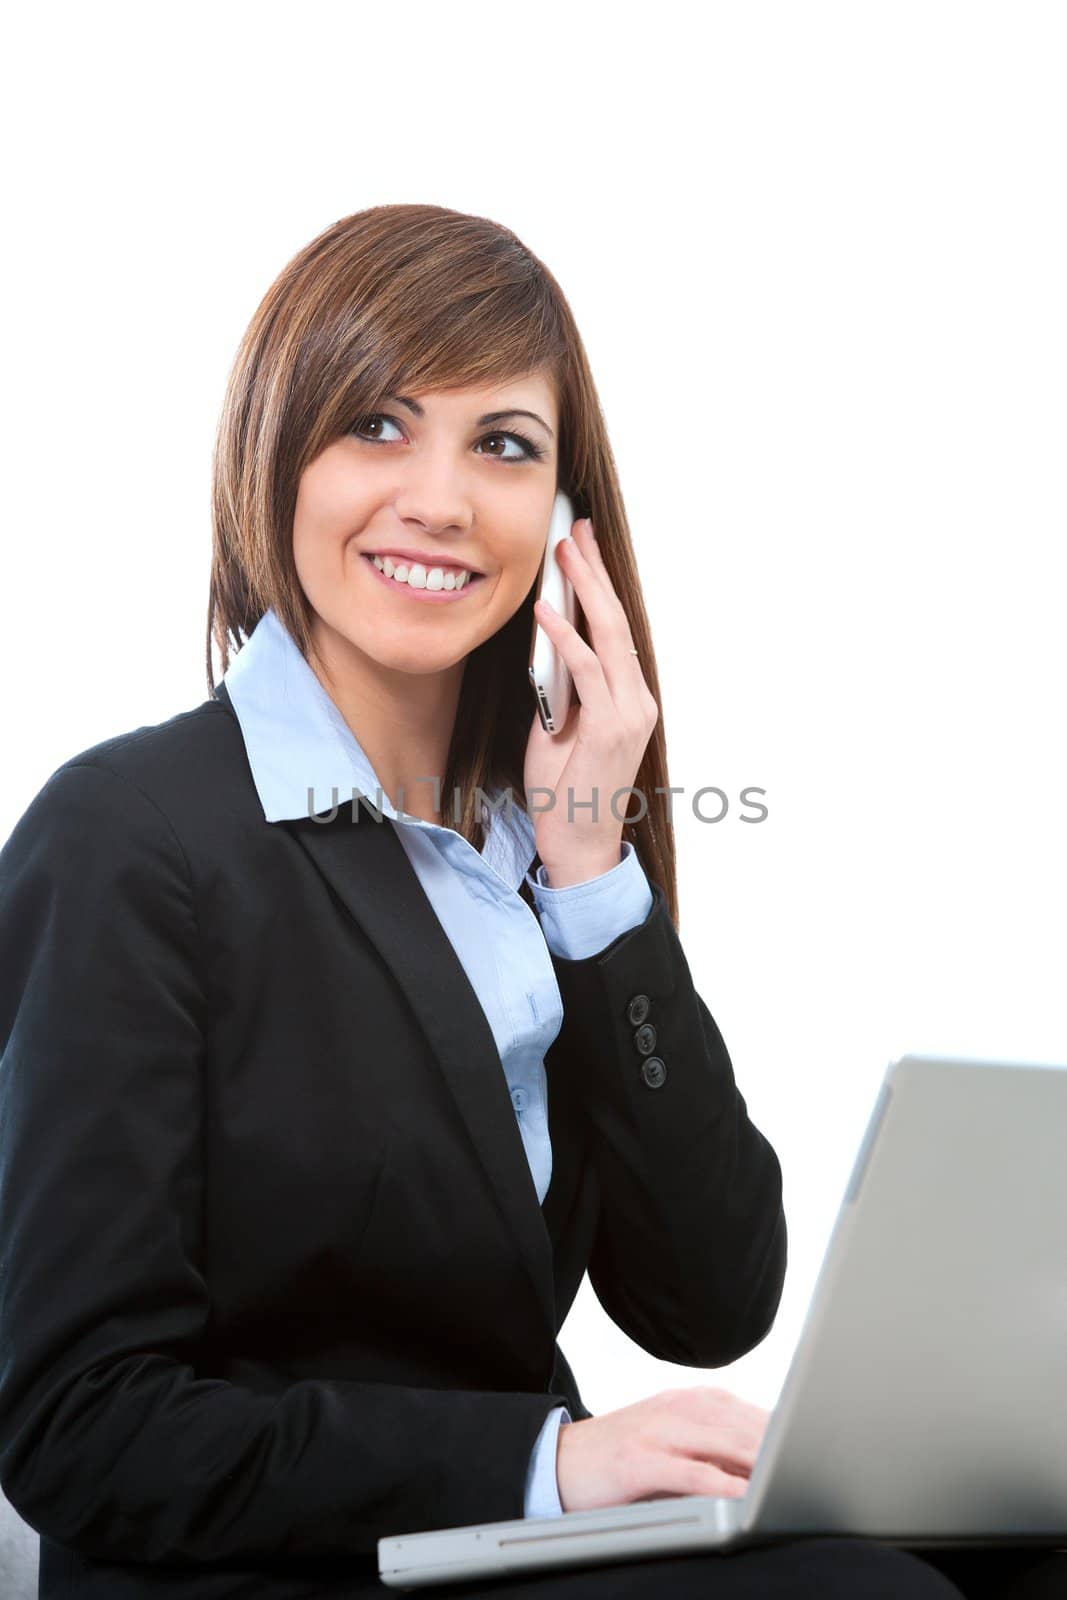 Attractive young business woman talking on cell phone with laptop. Isolated on white.